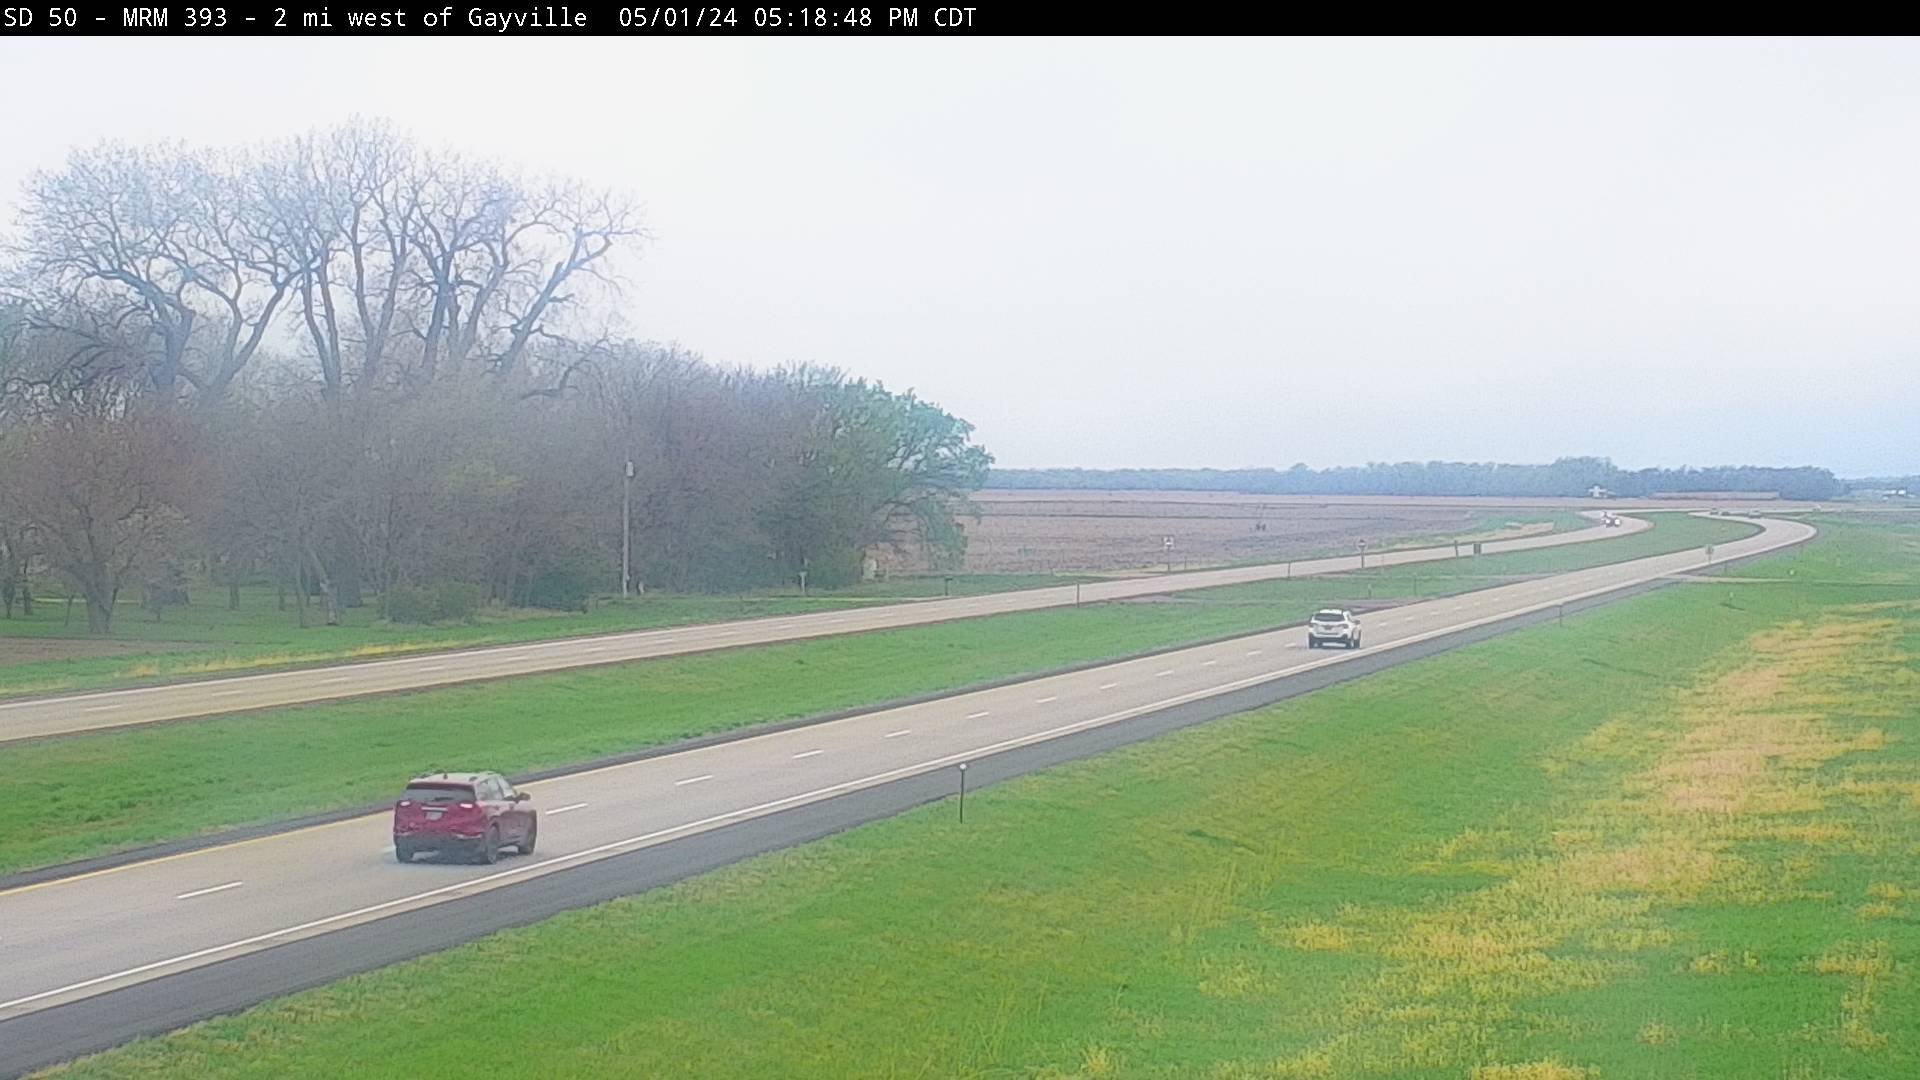 Traffic Cam 2 miles west of town along SD-50 @ MP 393 - West Player